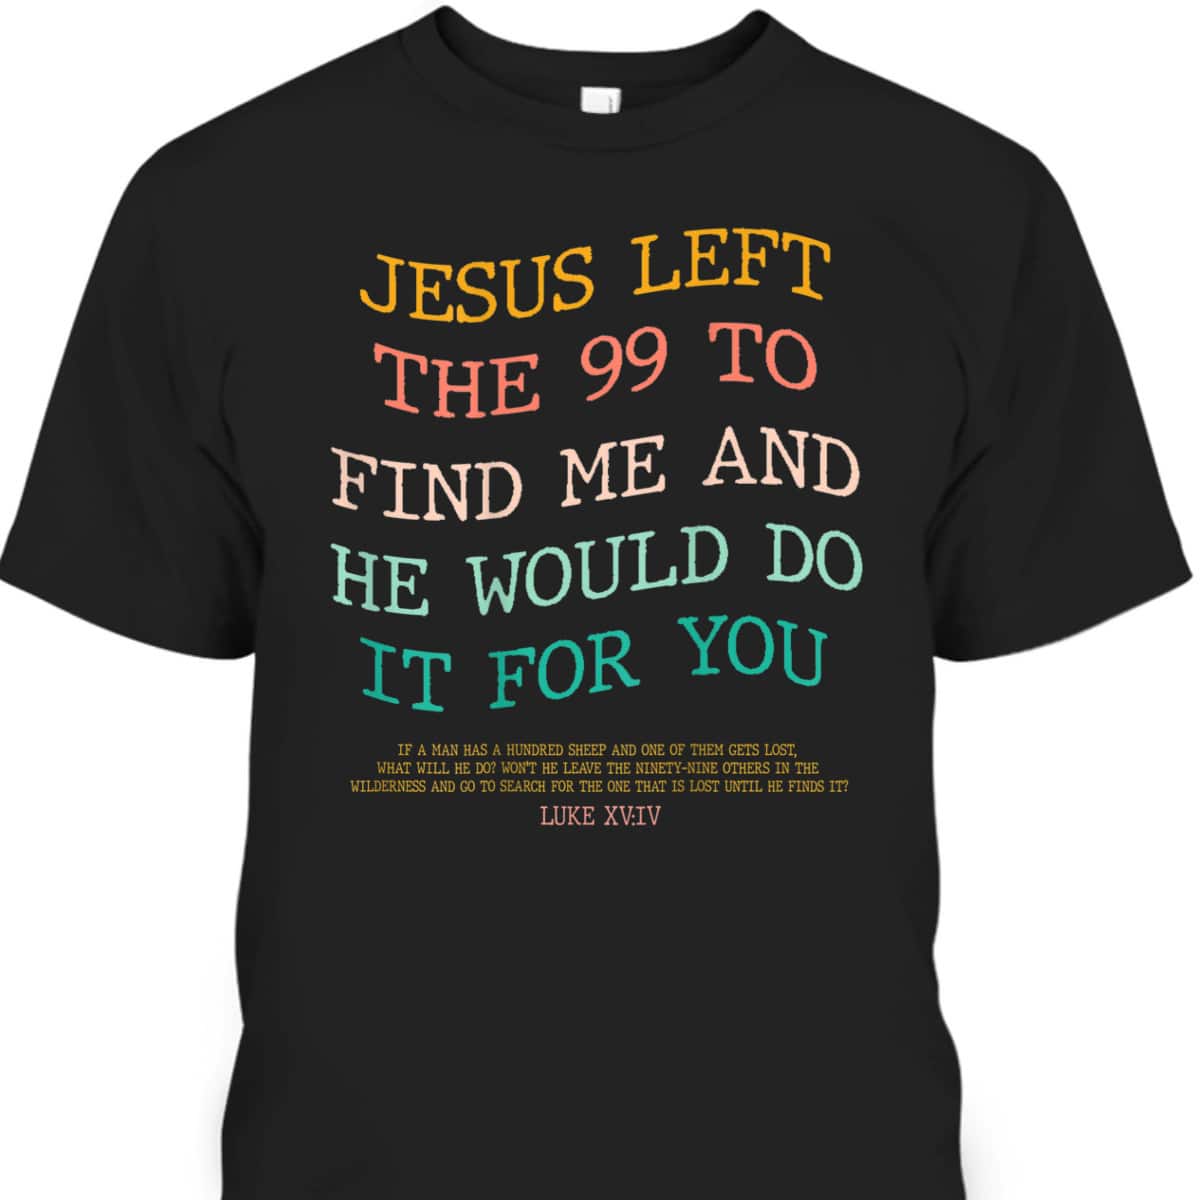 Jesus Left The 99 To Find Me & He Would Do It For You Back Bible Verse Chirstian T-Shirt